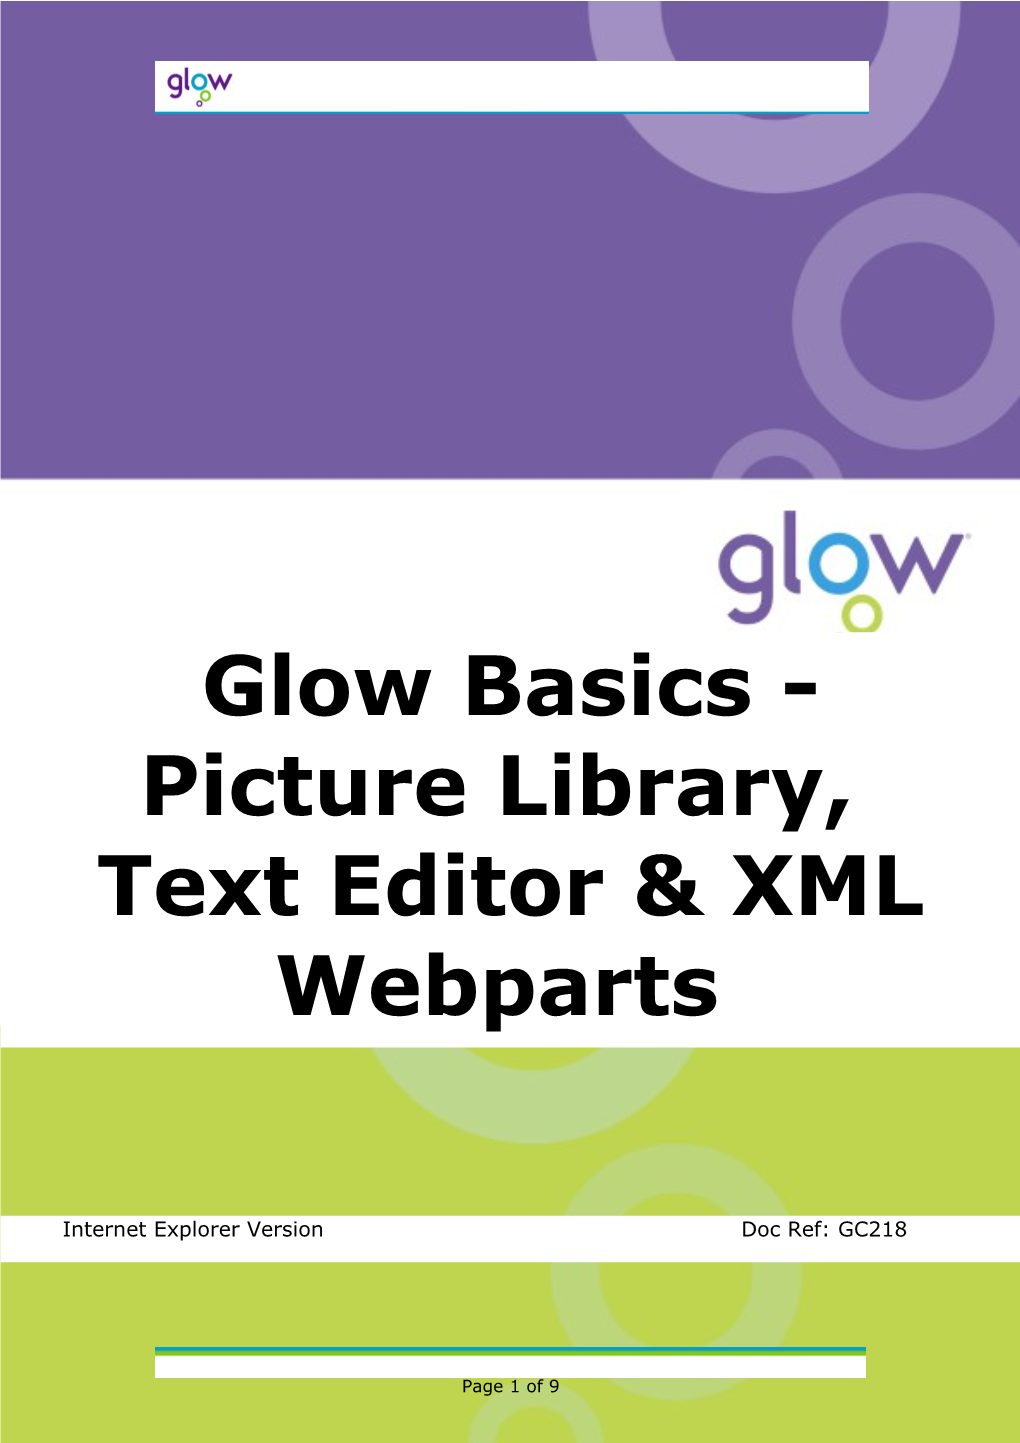 Glow Groups Training Guide - IE - GC218